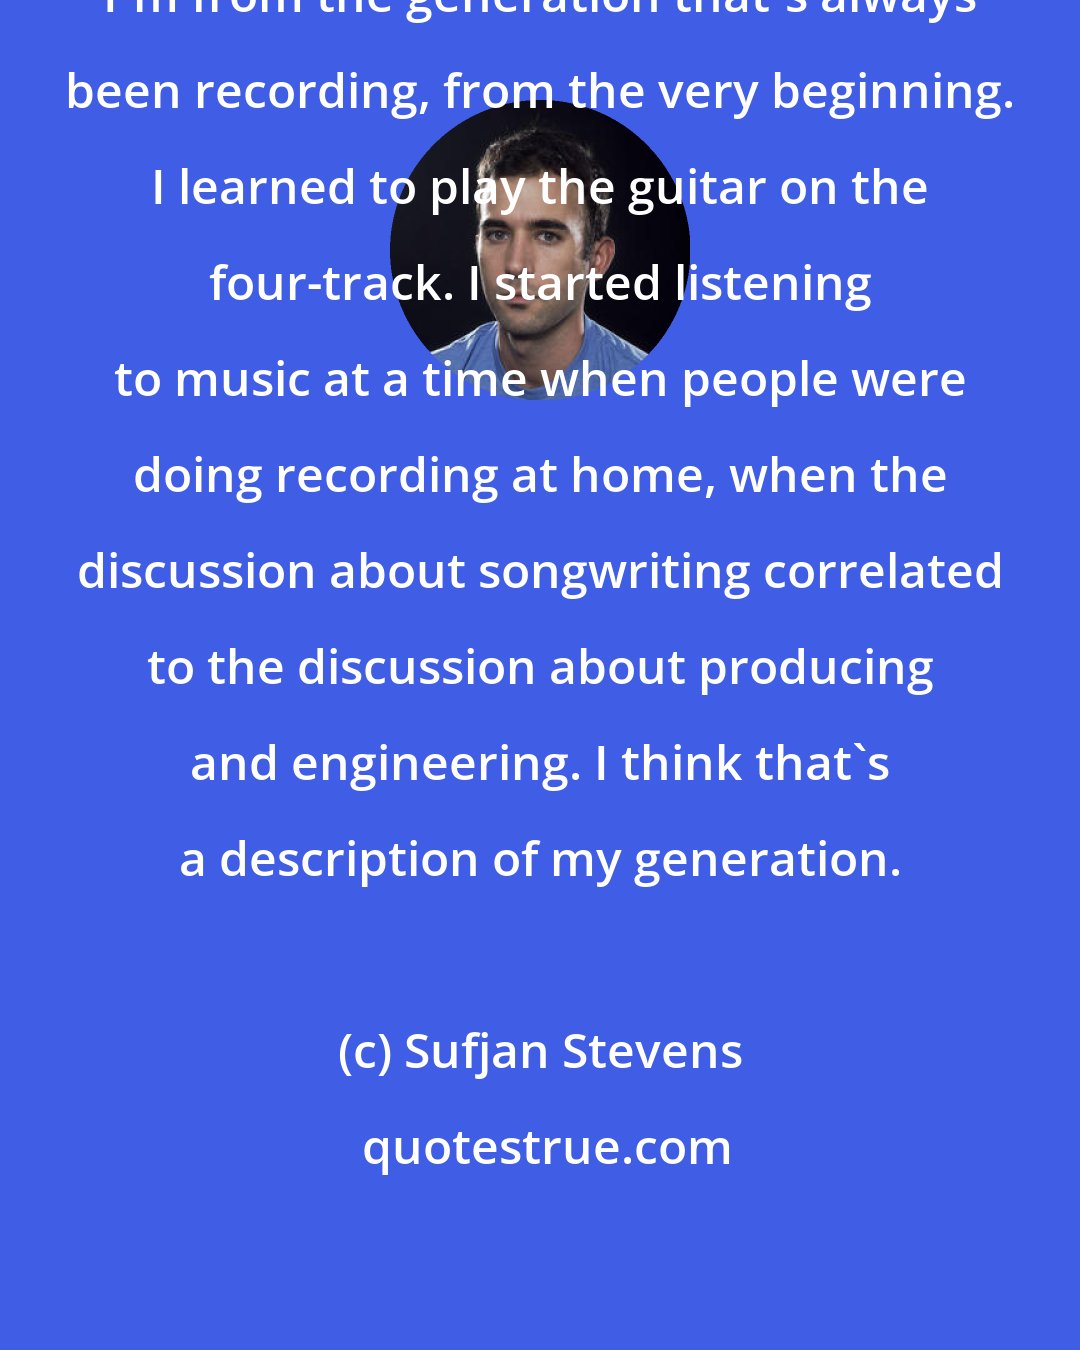 Sufjan Stevens: I'm from the generation that's always been recording, from the very beginning. I learned to play the guitar on the four-track. I started listening to music at a time when people were doing recording at home, when the discussion about songwriting correlated to the discussion about producing and engineering. I think that's a description of my generation.